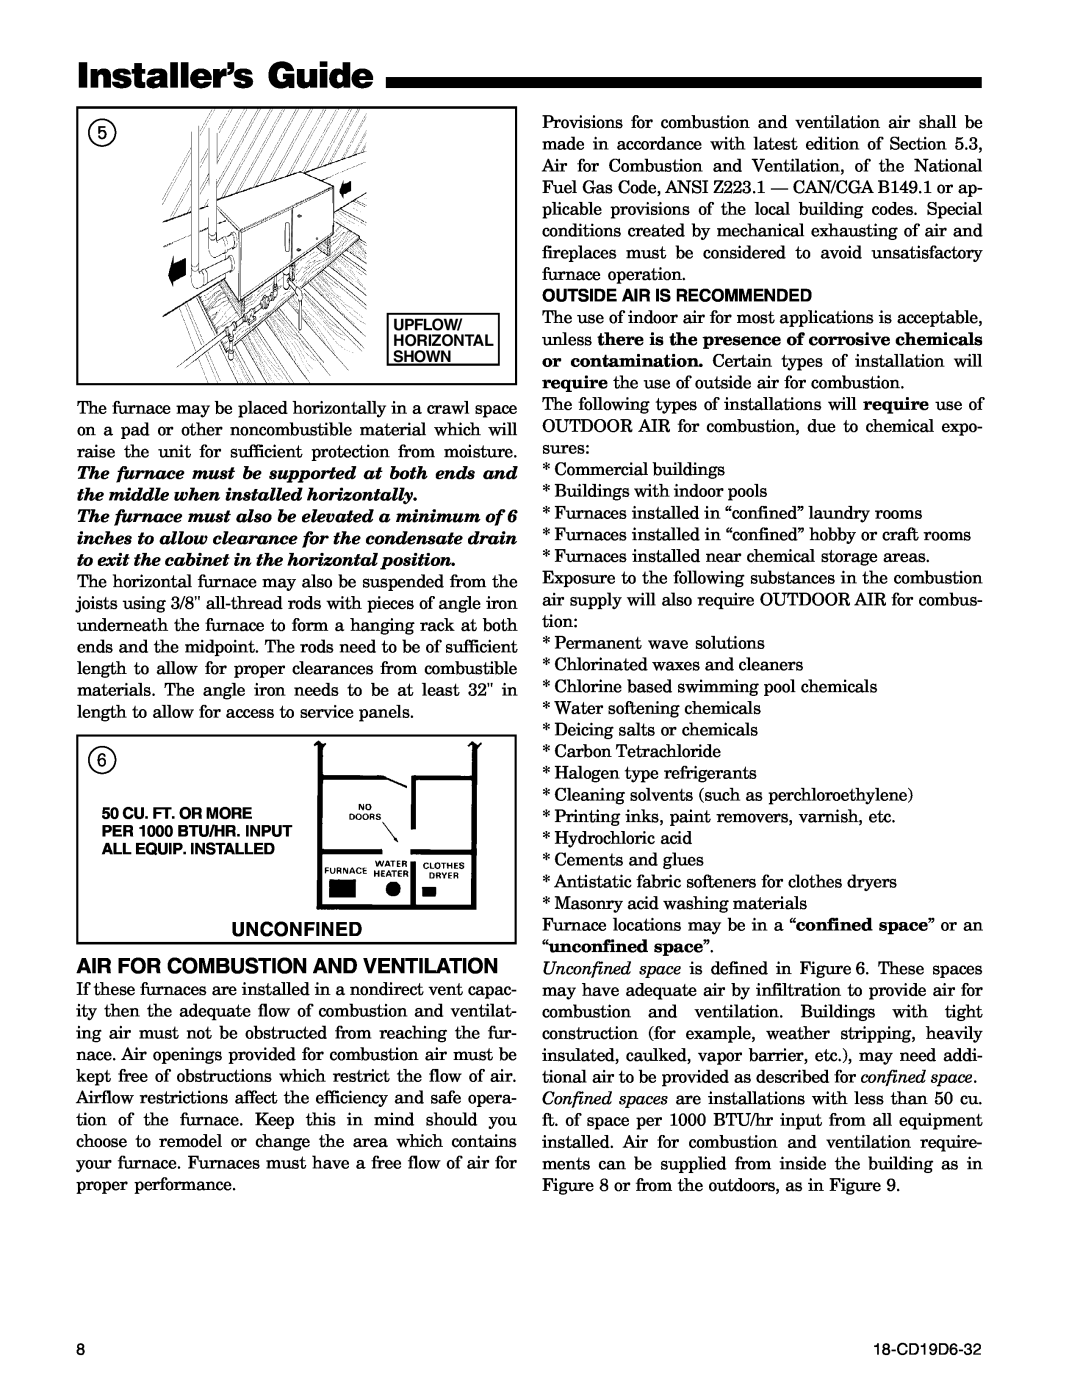 Trane DX1D120A9601A manual Installer’s Guide, Air For Combustion And Ventilation, Unconfined, Outside Air Is Recommended 